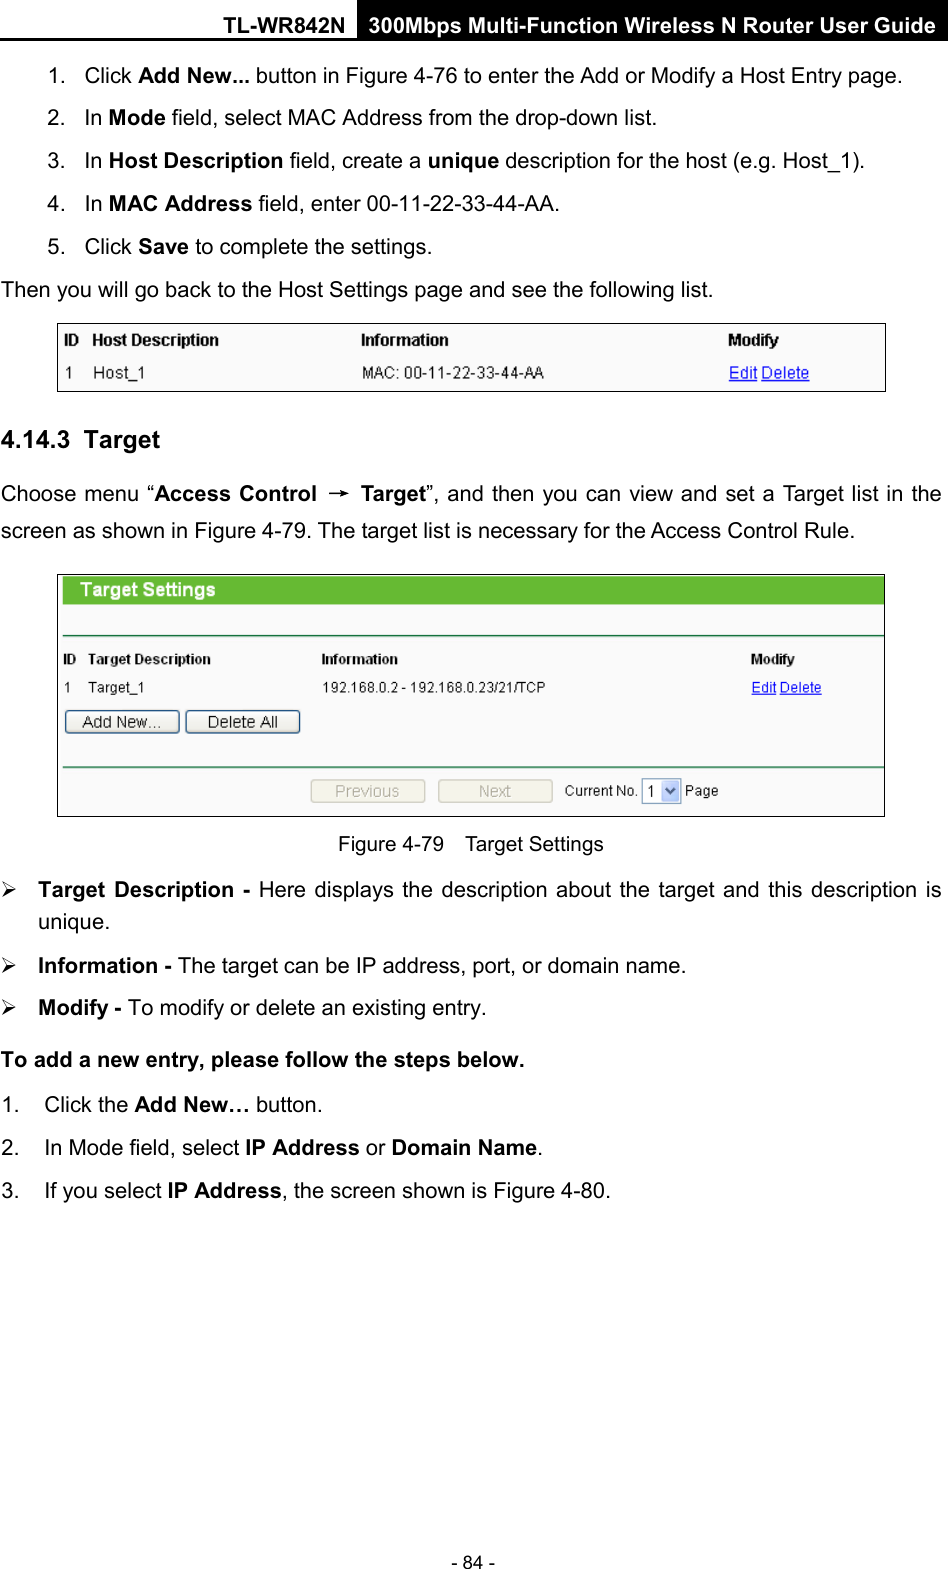 TL-WR842N 300Mbps Multi-Function Wireless N Router User Guide  - 84 - 1. Click Add New... button in Figure 4-76 to enter the Add or Modify a Host Entry page.   2. In Mode field, select MAC Address from the drop-down list.   3. In Host Description field, create a unique description for the host (e.g. Host_1).   4. In MAC Address field, enter 00-11-22-33-44-AA.   5. Click Save to complete the settings.   Then you will go back to the Host Settings page and see the following list.  4.14.3  Target Choose menu “Access Control → Target”, and then you can view and set a Target list in the screen as shown in Figure 4-79. The target list is necessary for the Access Control Rule.  Figure 4-79  Target Settings  Target Description - Here displays the description about the target and this description is unique.    Information - The target can be IP address, port, or domain name.    Modify - To modify or delete an existing entry.   To add a new entry, please follow the steps below. 1.  Click the Add New… button. 2. In Mode field, select IP Address or Domain Name. 3.  If you select IP Address, the screen shown is Figure 4-80.   